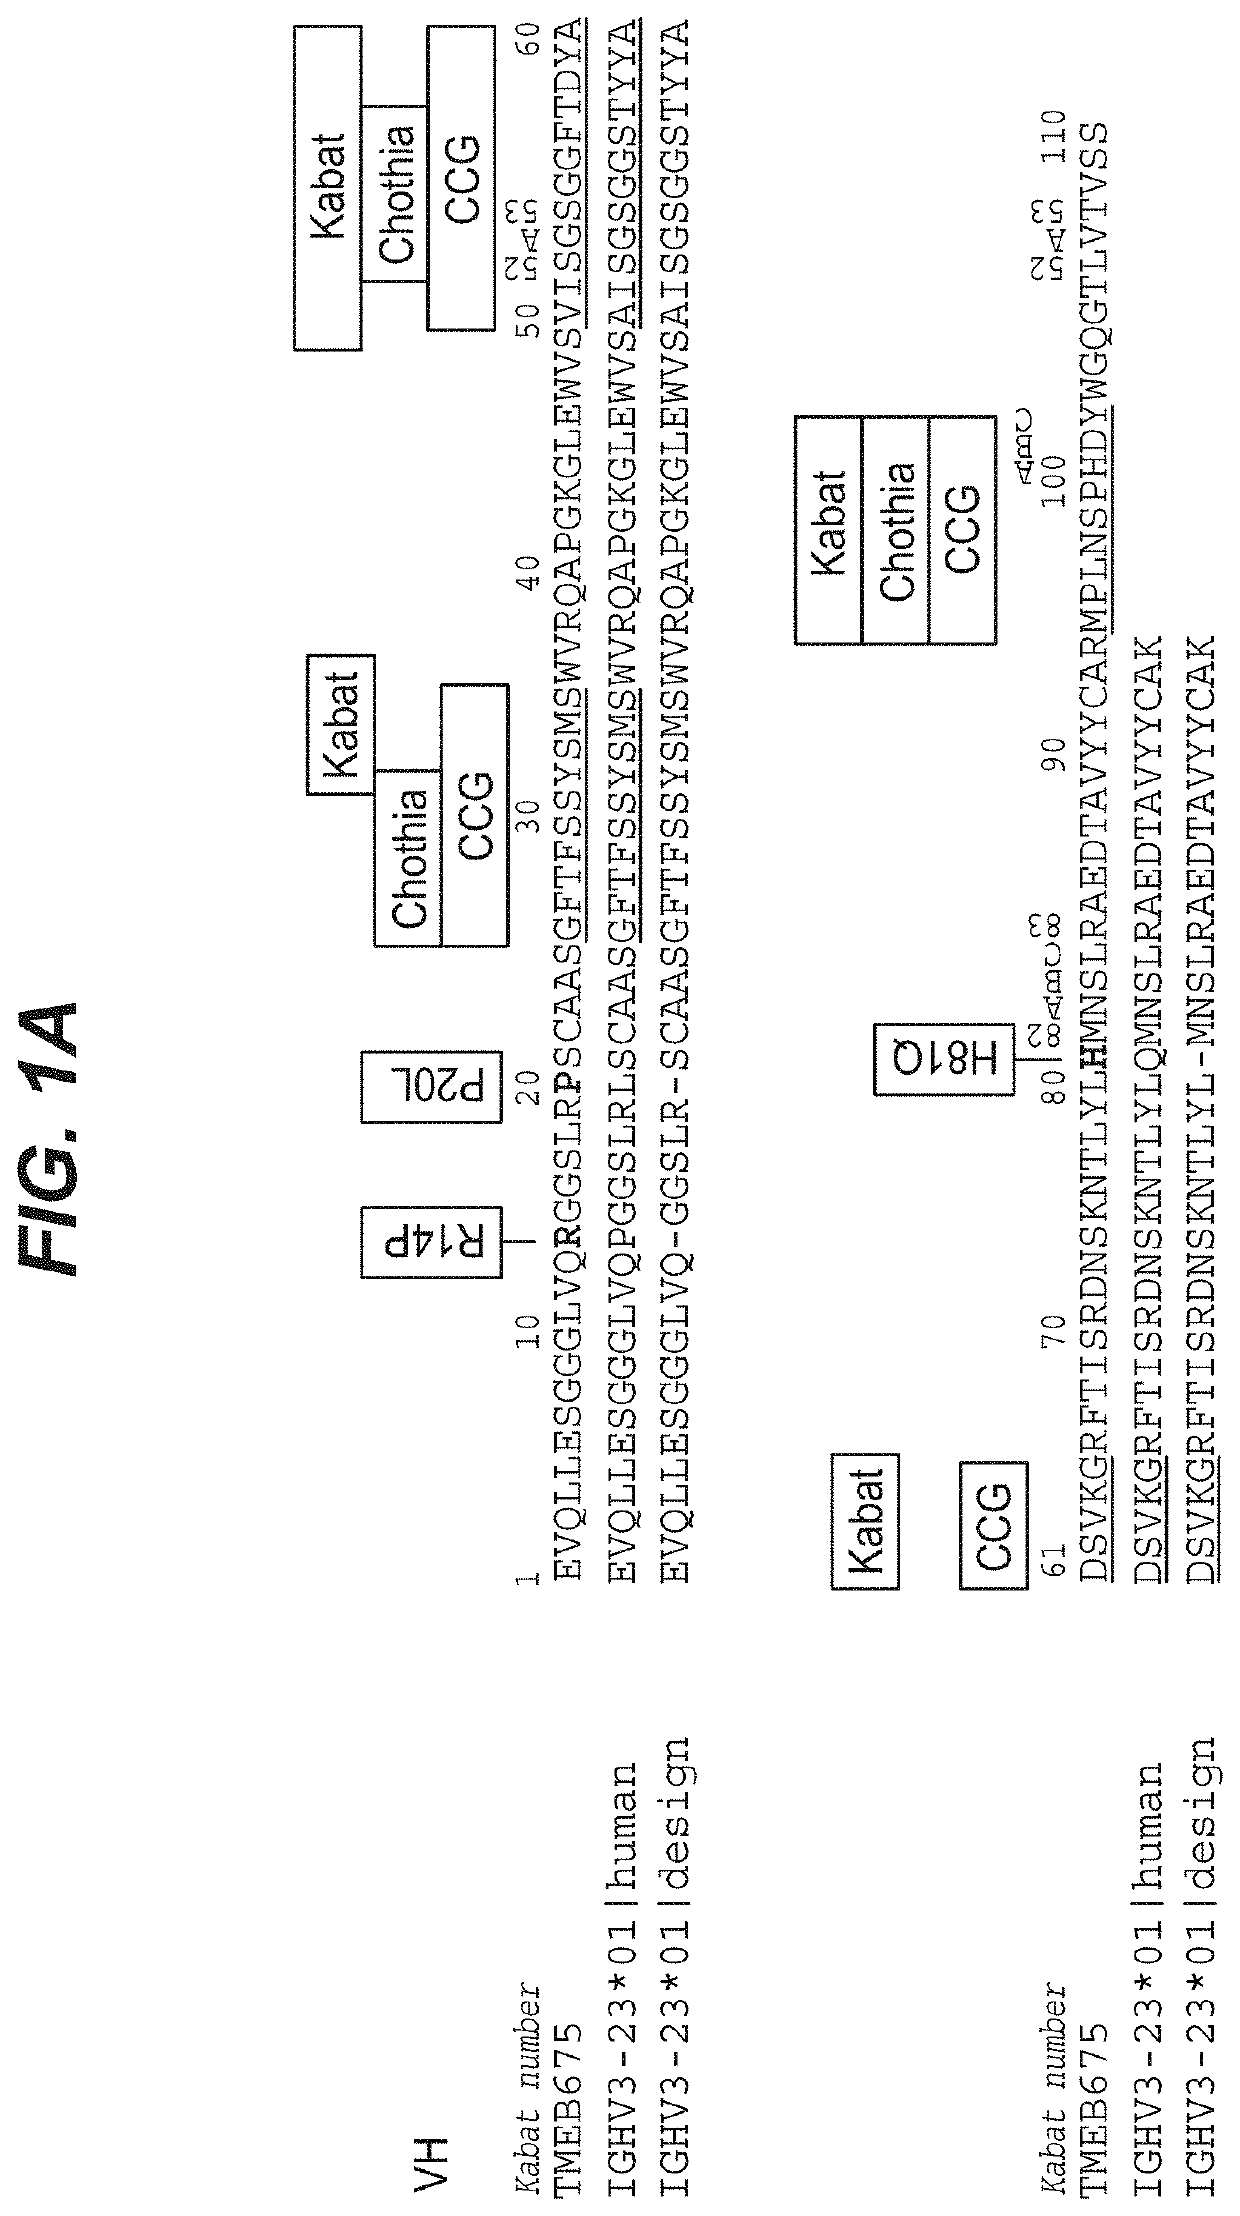 Methods for producing biotherapeutics with increased stability by sequence optimization